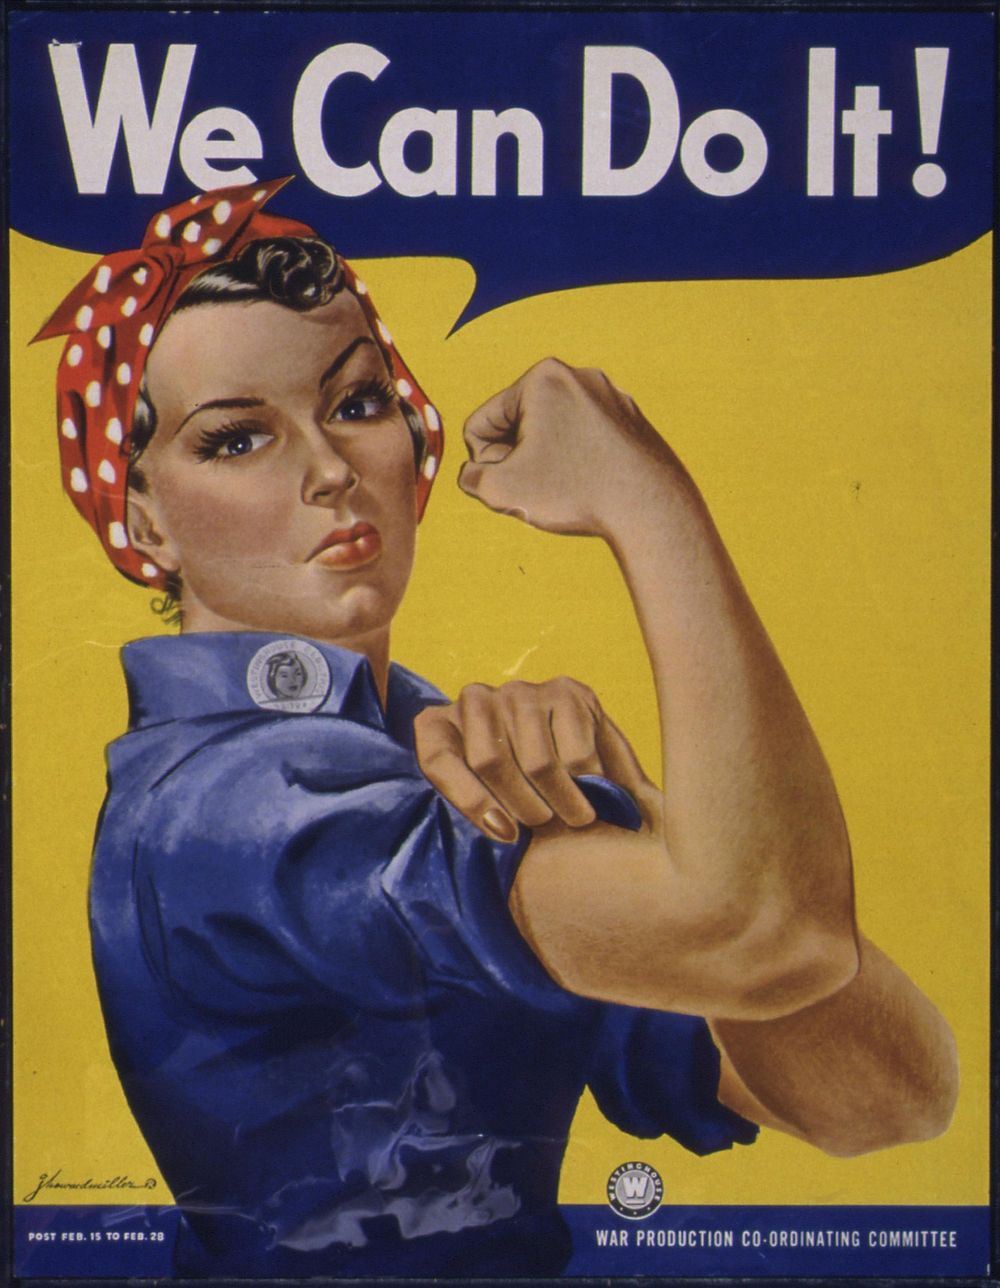 Woman showing muscle, We Can Do It! text. Original public domain image from Flickr